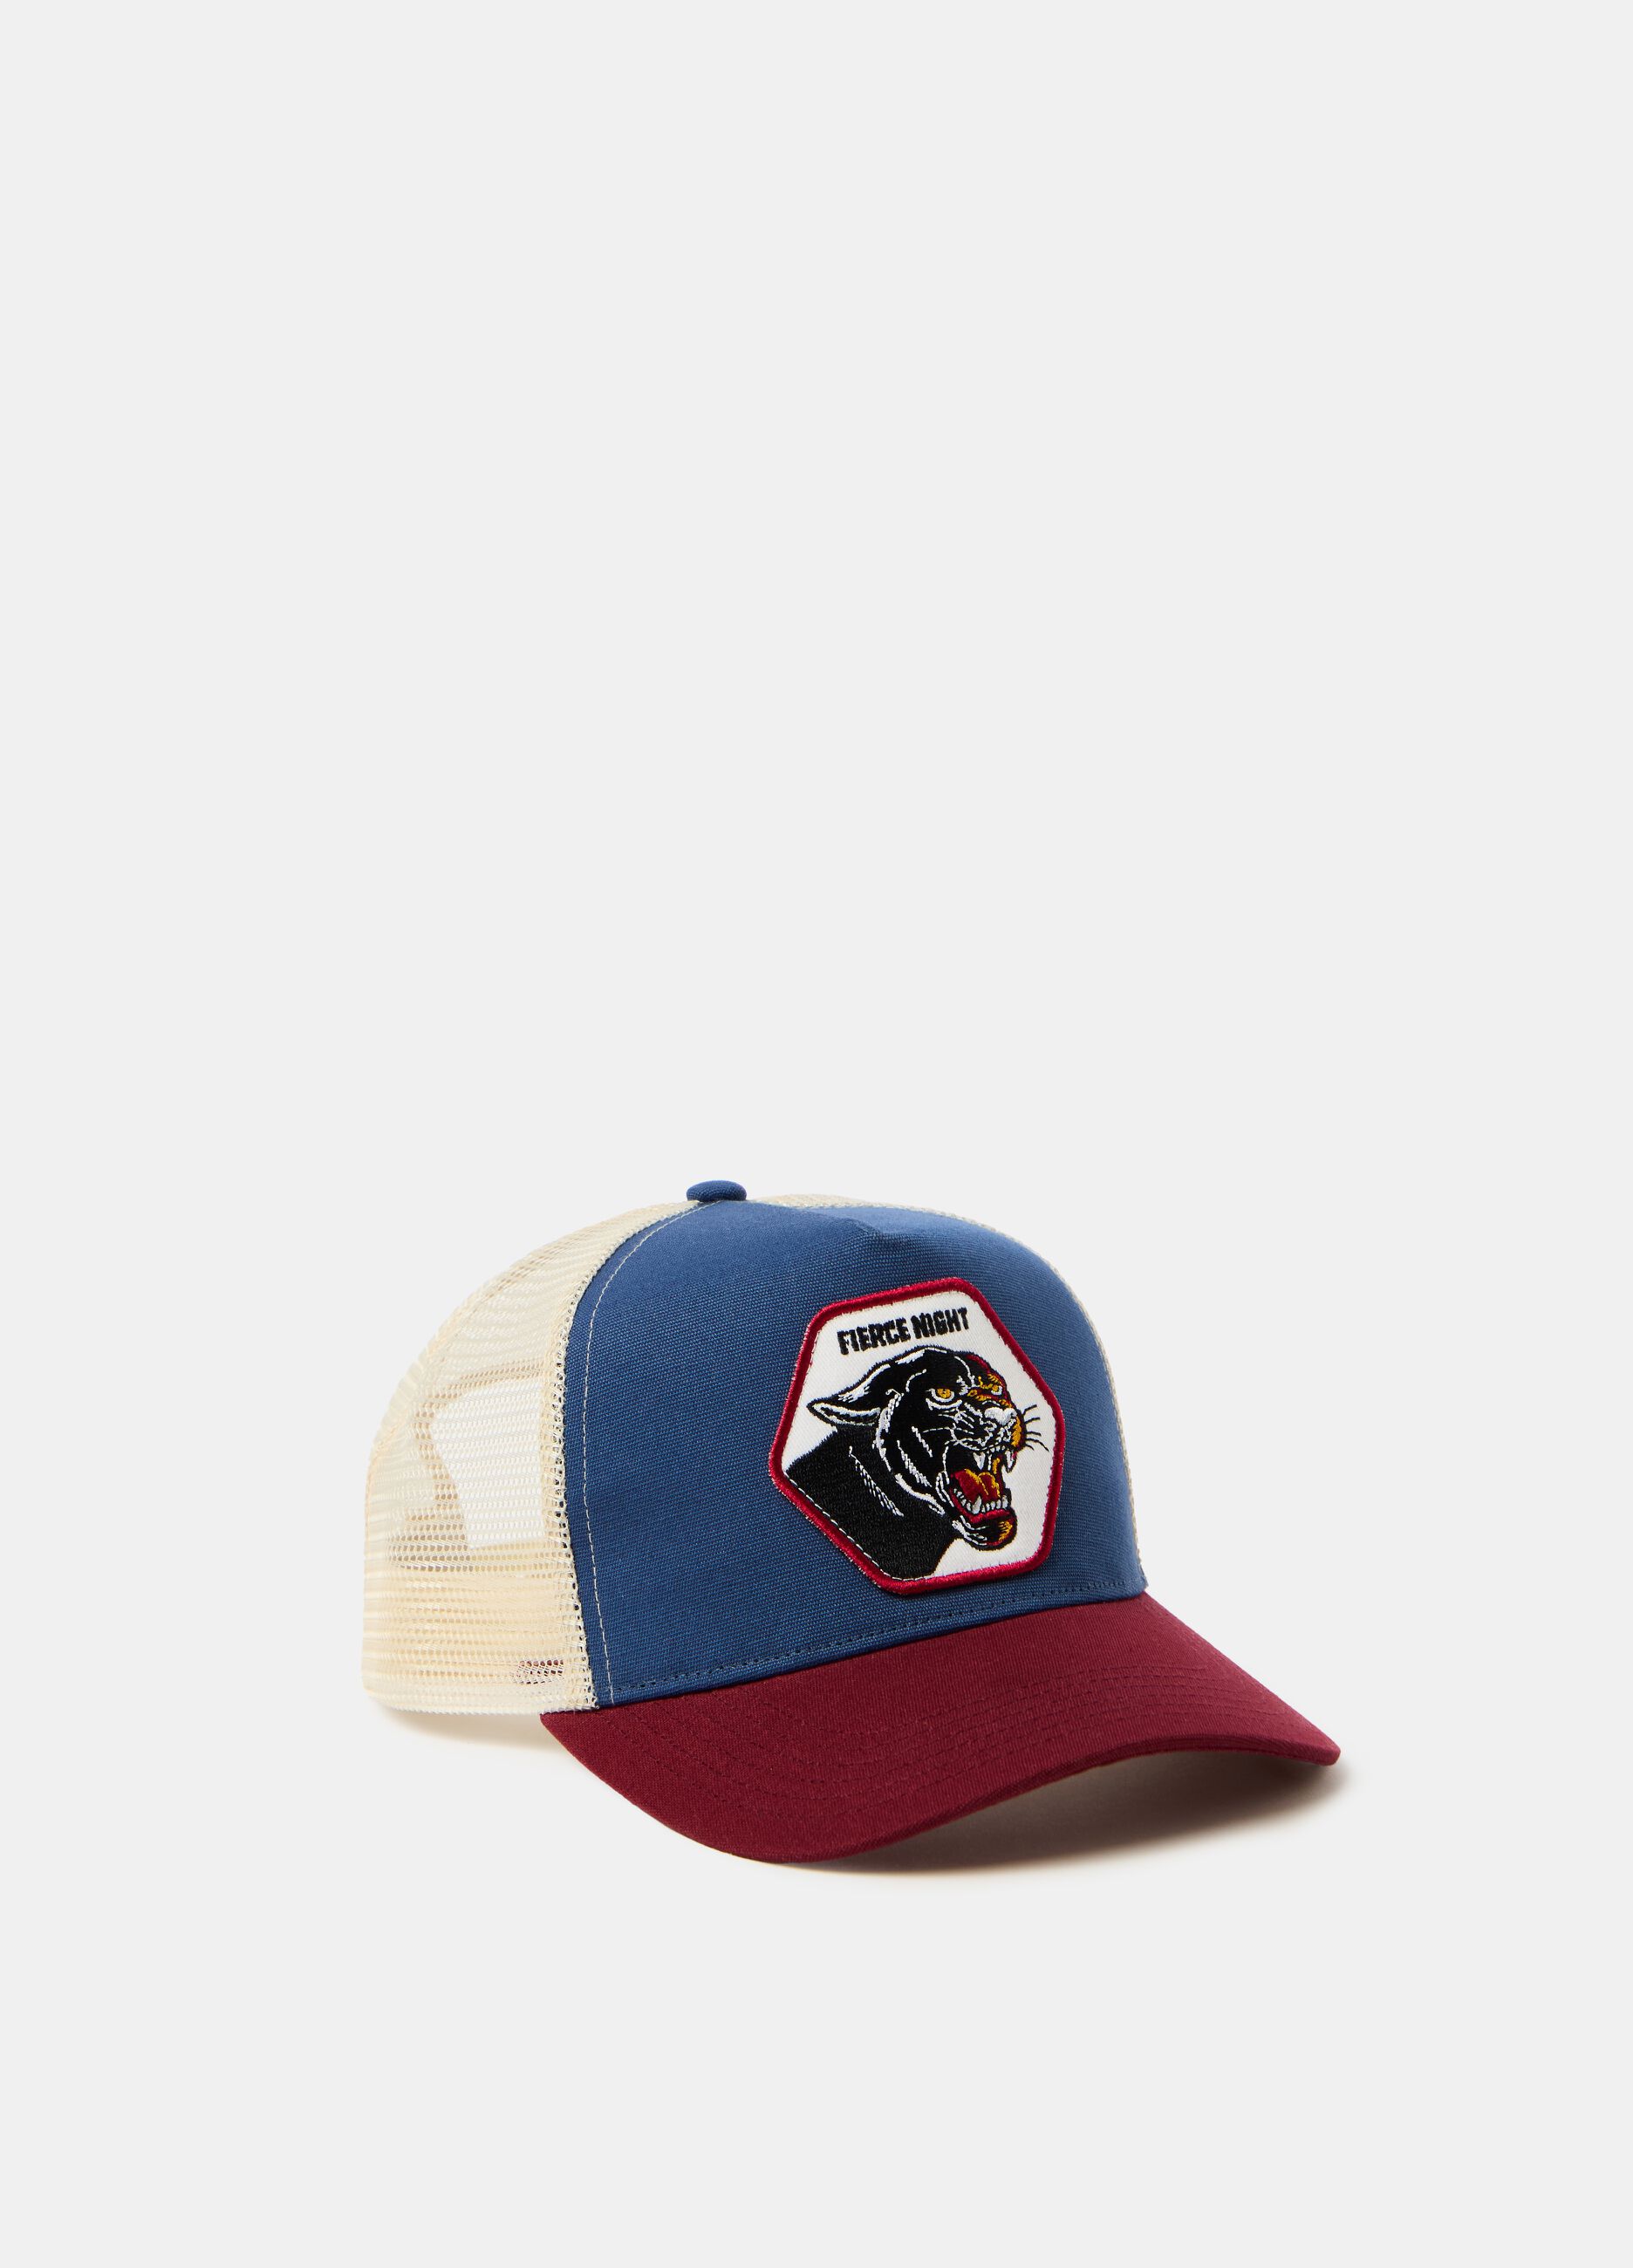 Baseball cap with panther patch